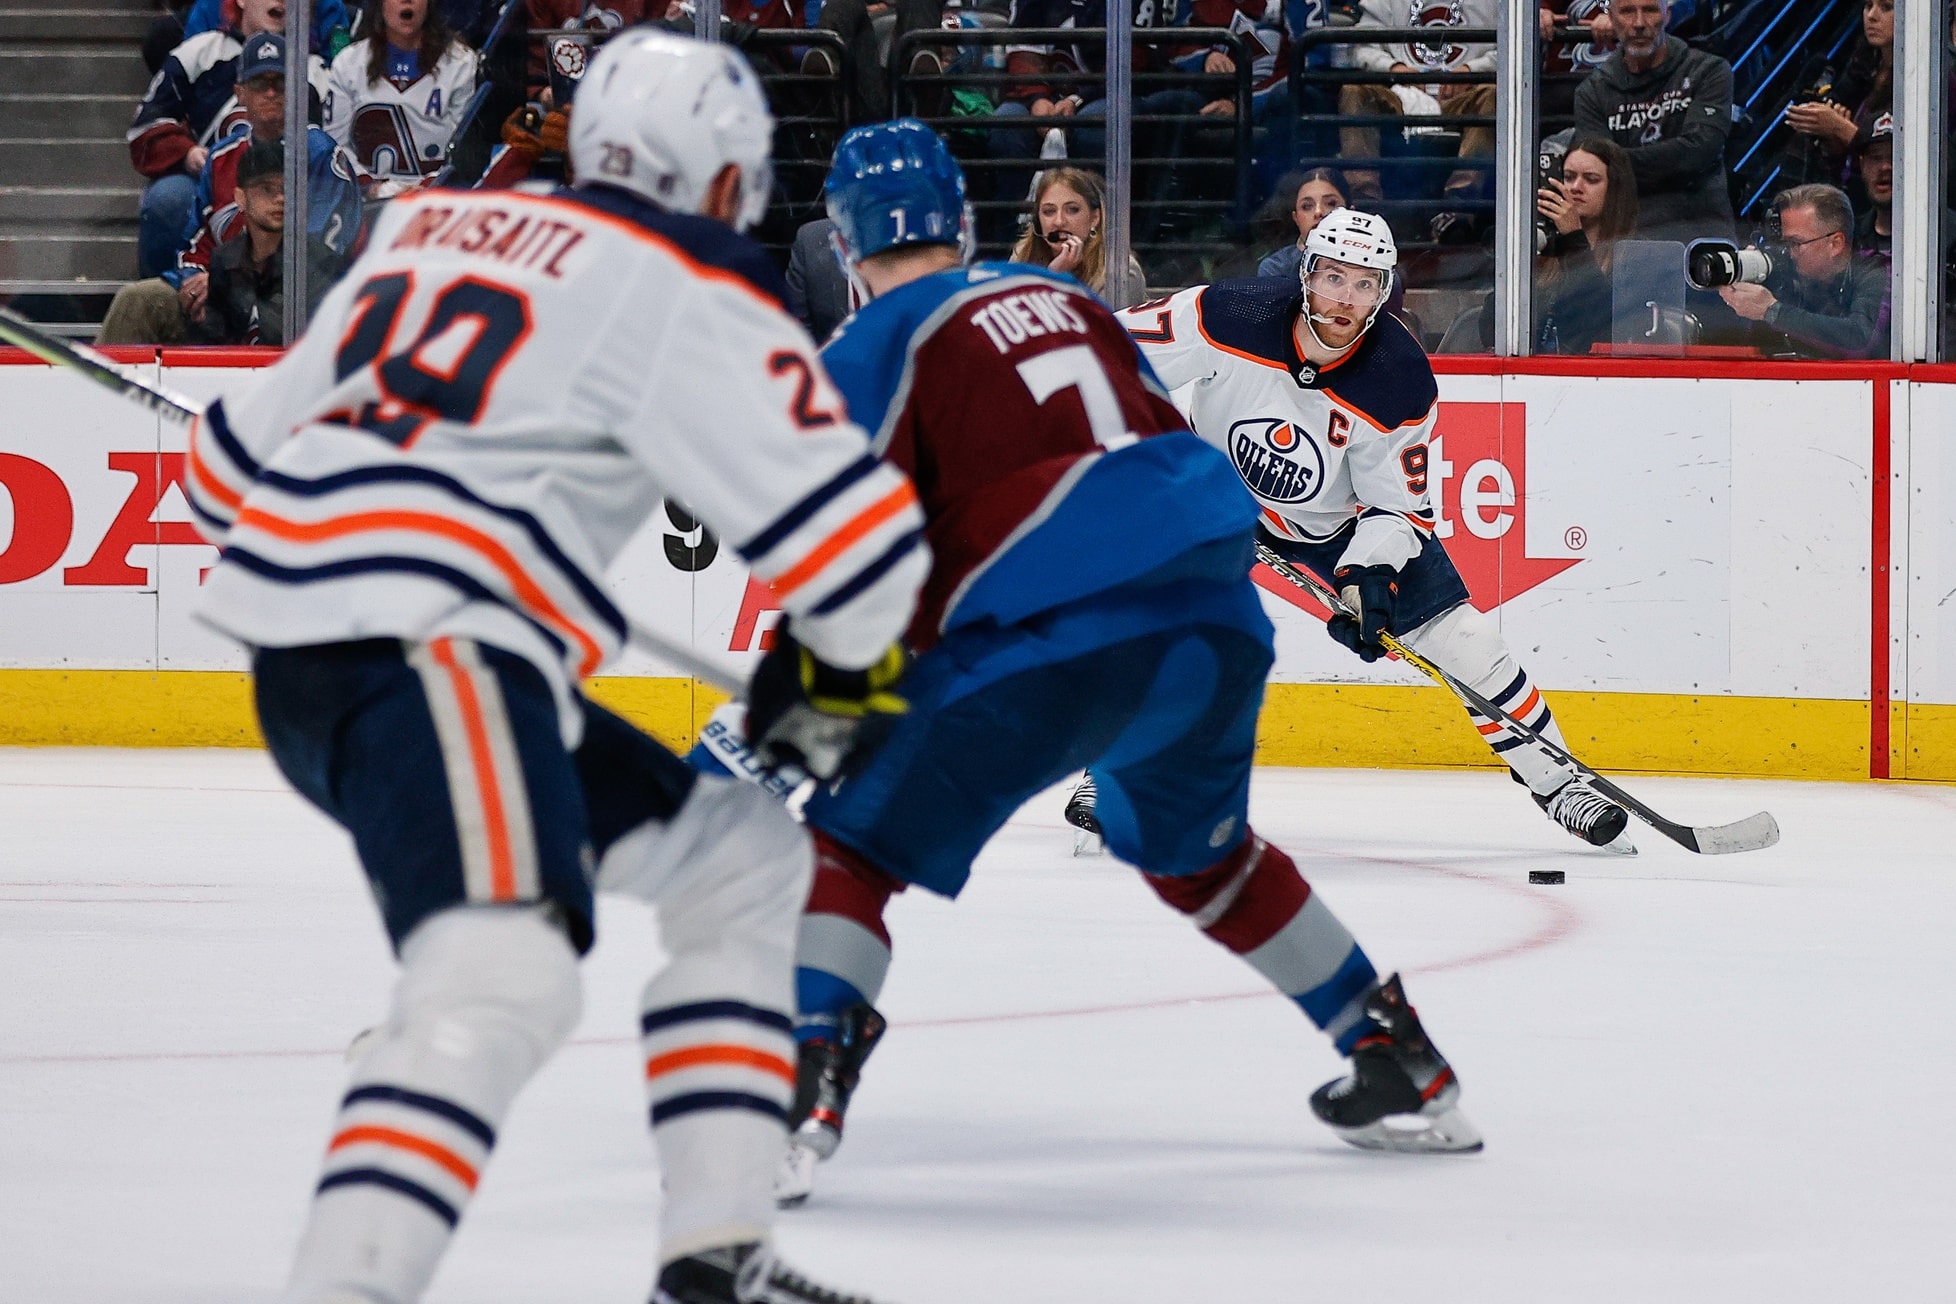 Edmonton Oilers center Connor McDavid (97) looks to pass the puck to center Leon Draisaitl (29) as Colorado Avalanche defenseman Devon Toews (7) defends in the third period in game one of the Western Conference Finals.